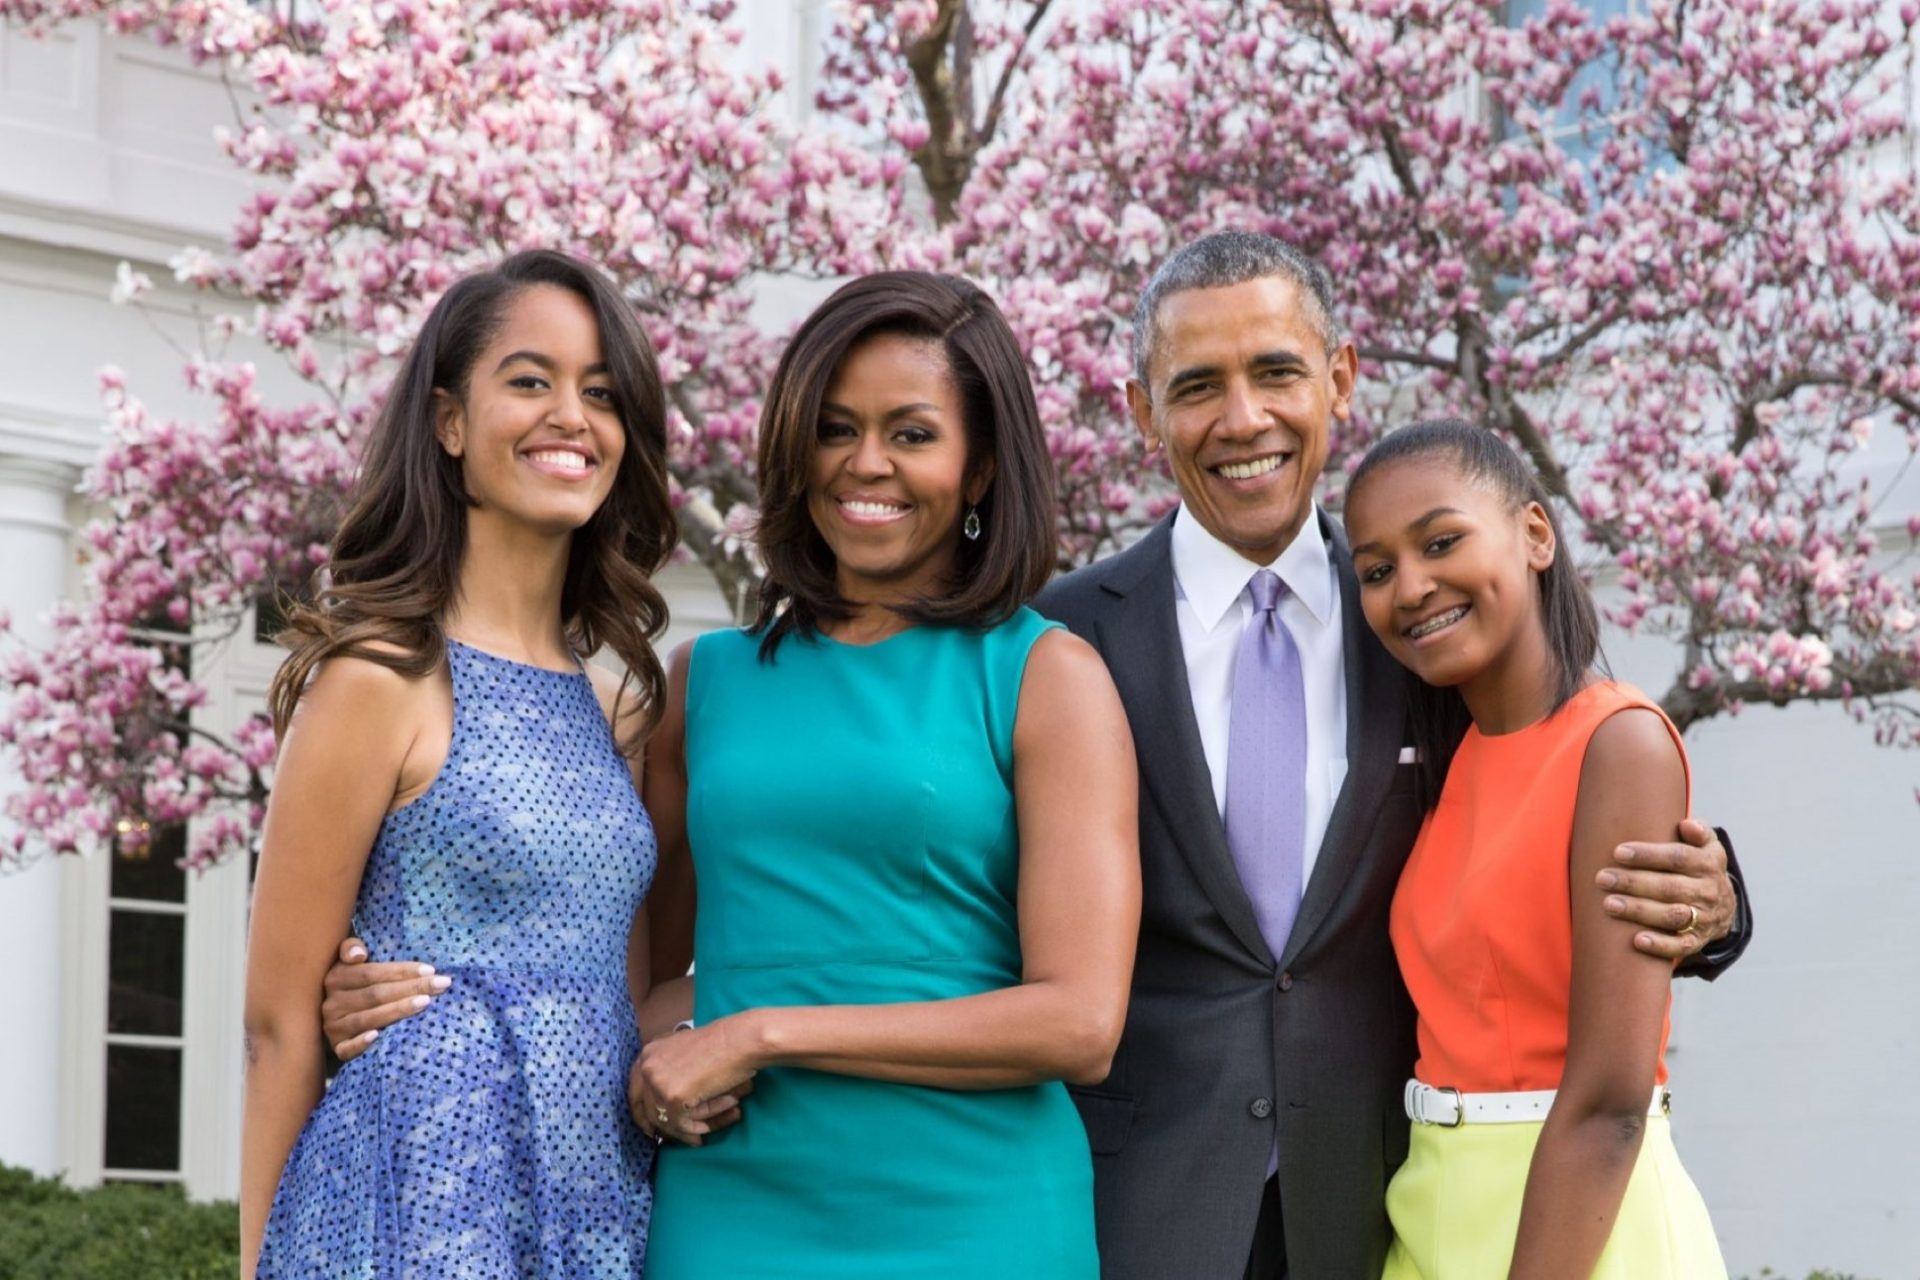 The Obama daughters: what are they doing now?